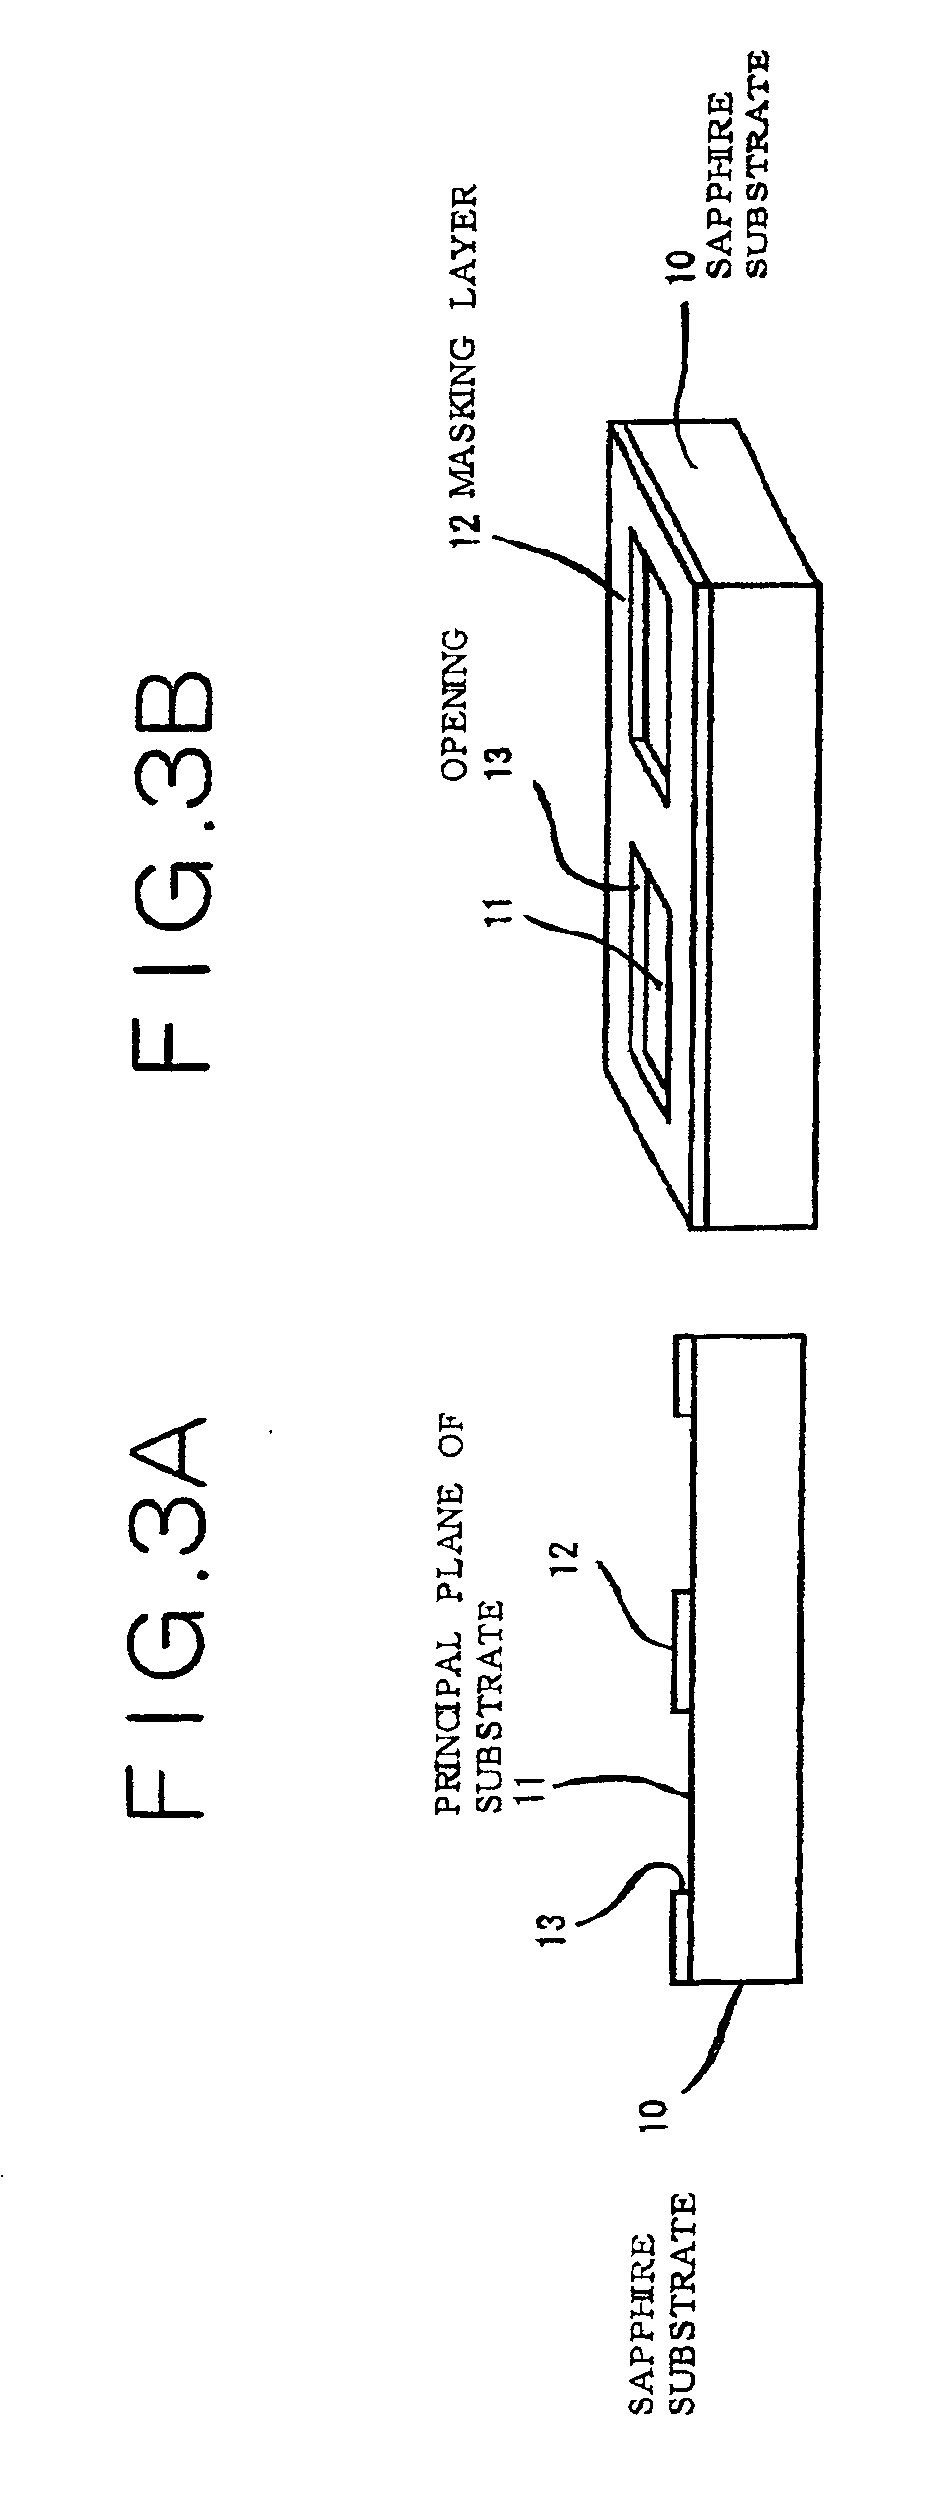 Semiconductor light-emitting device and process for producing the same